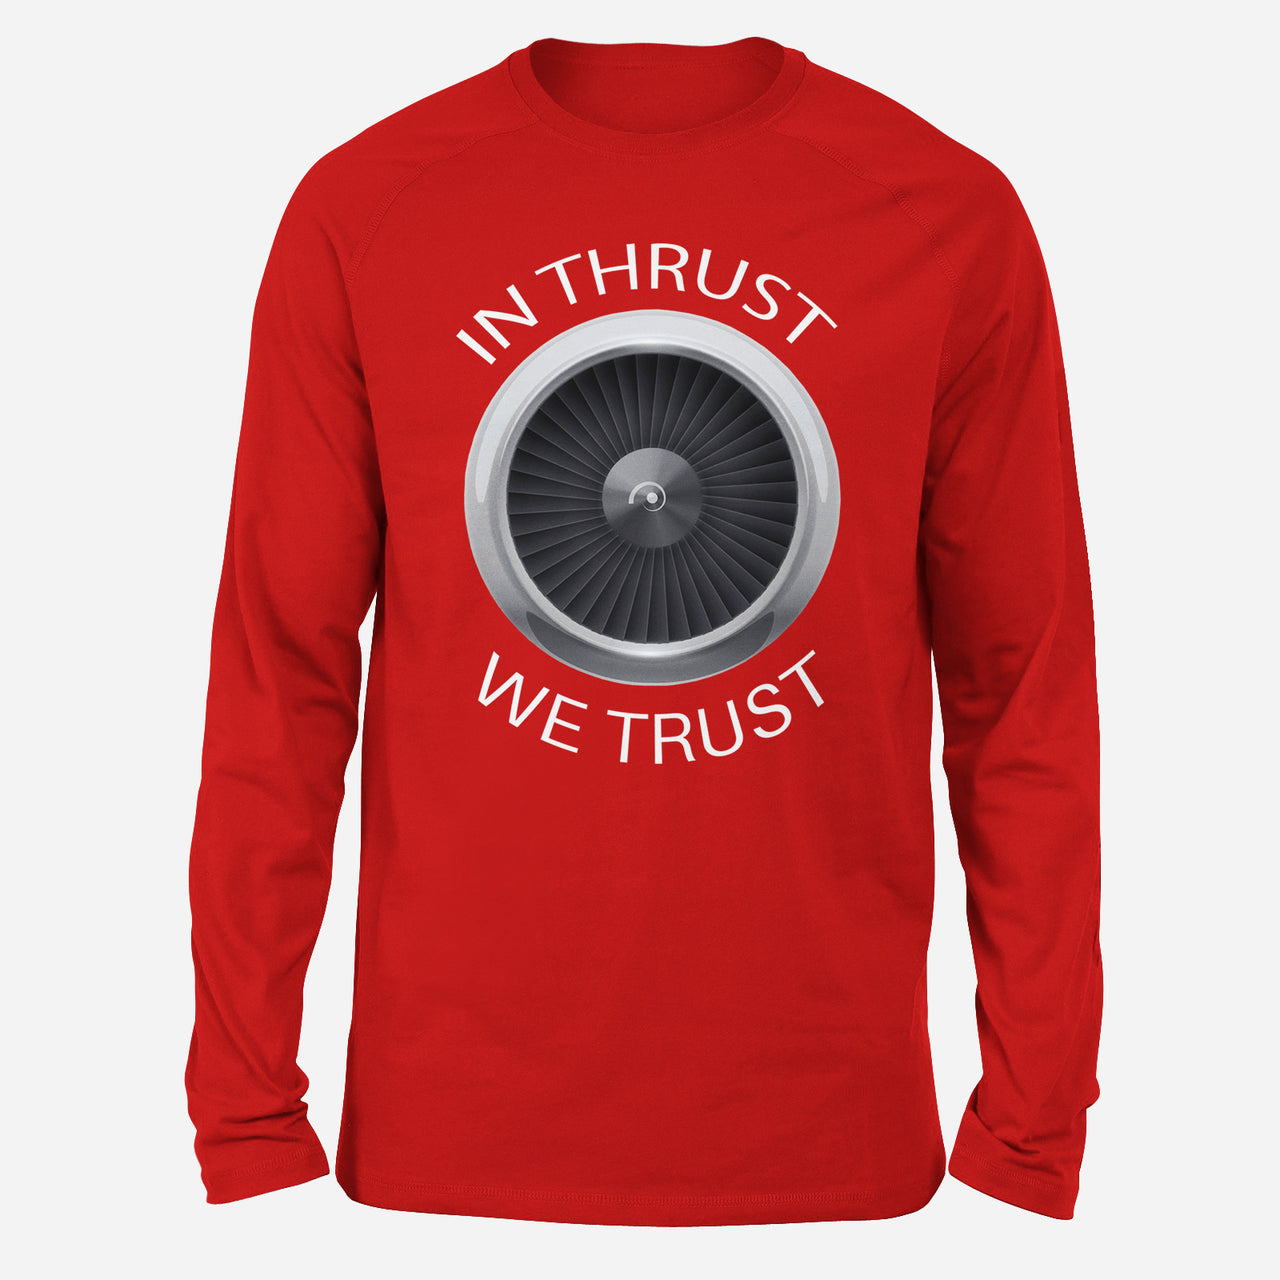 In Thrust We Trust Designed Long-Sleeve T-Shirts